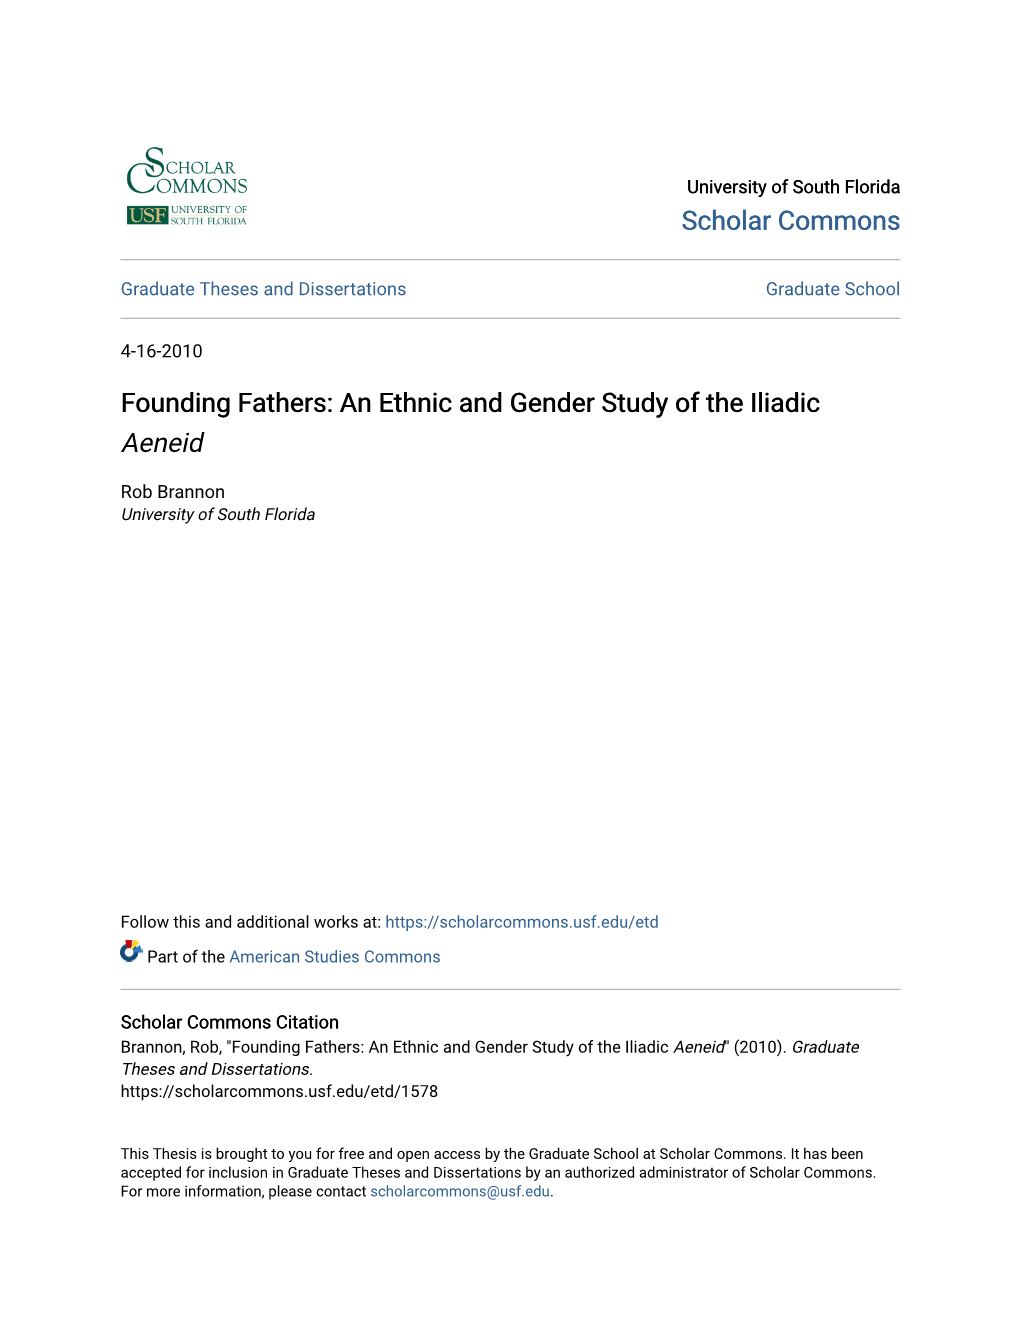 Founding Fathers: an Ethnic and Gender Study of the Iliadic Aeneid